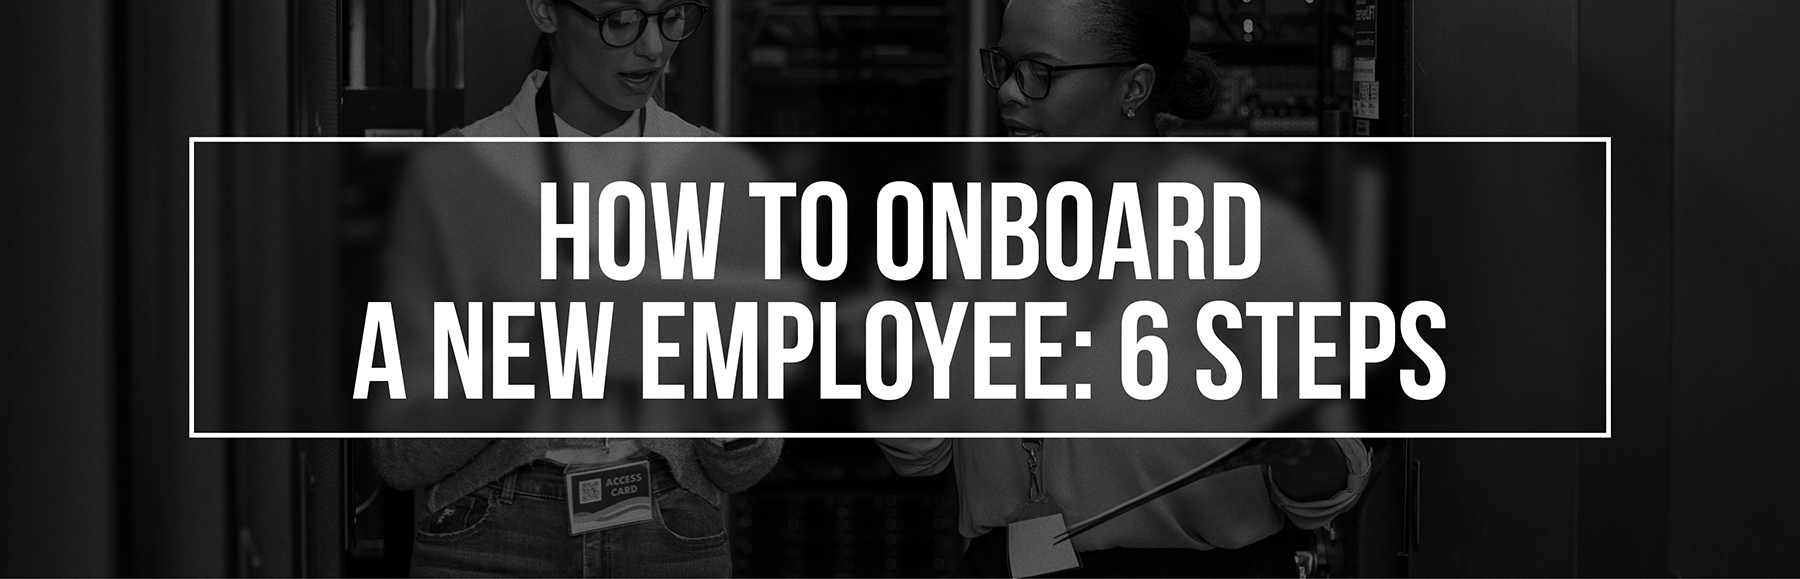 how-to-onboard-new-employee